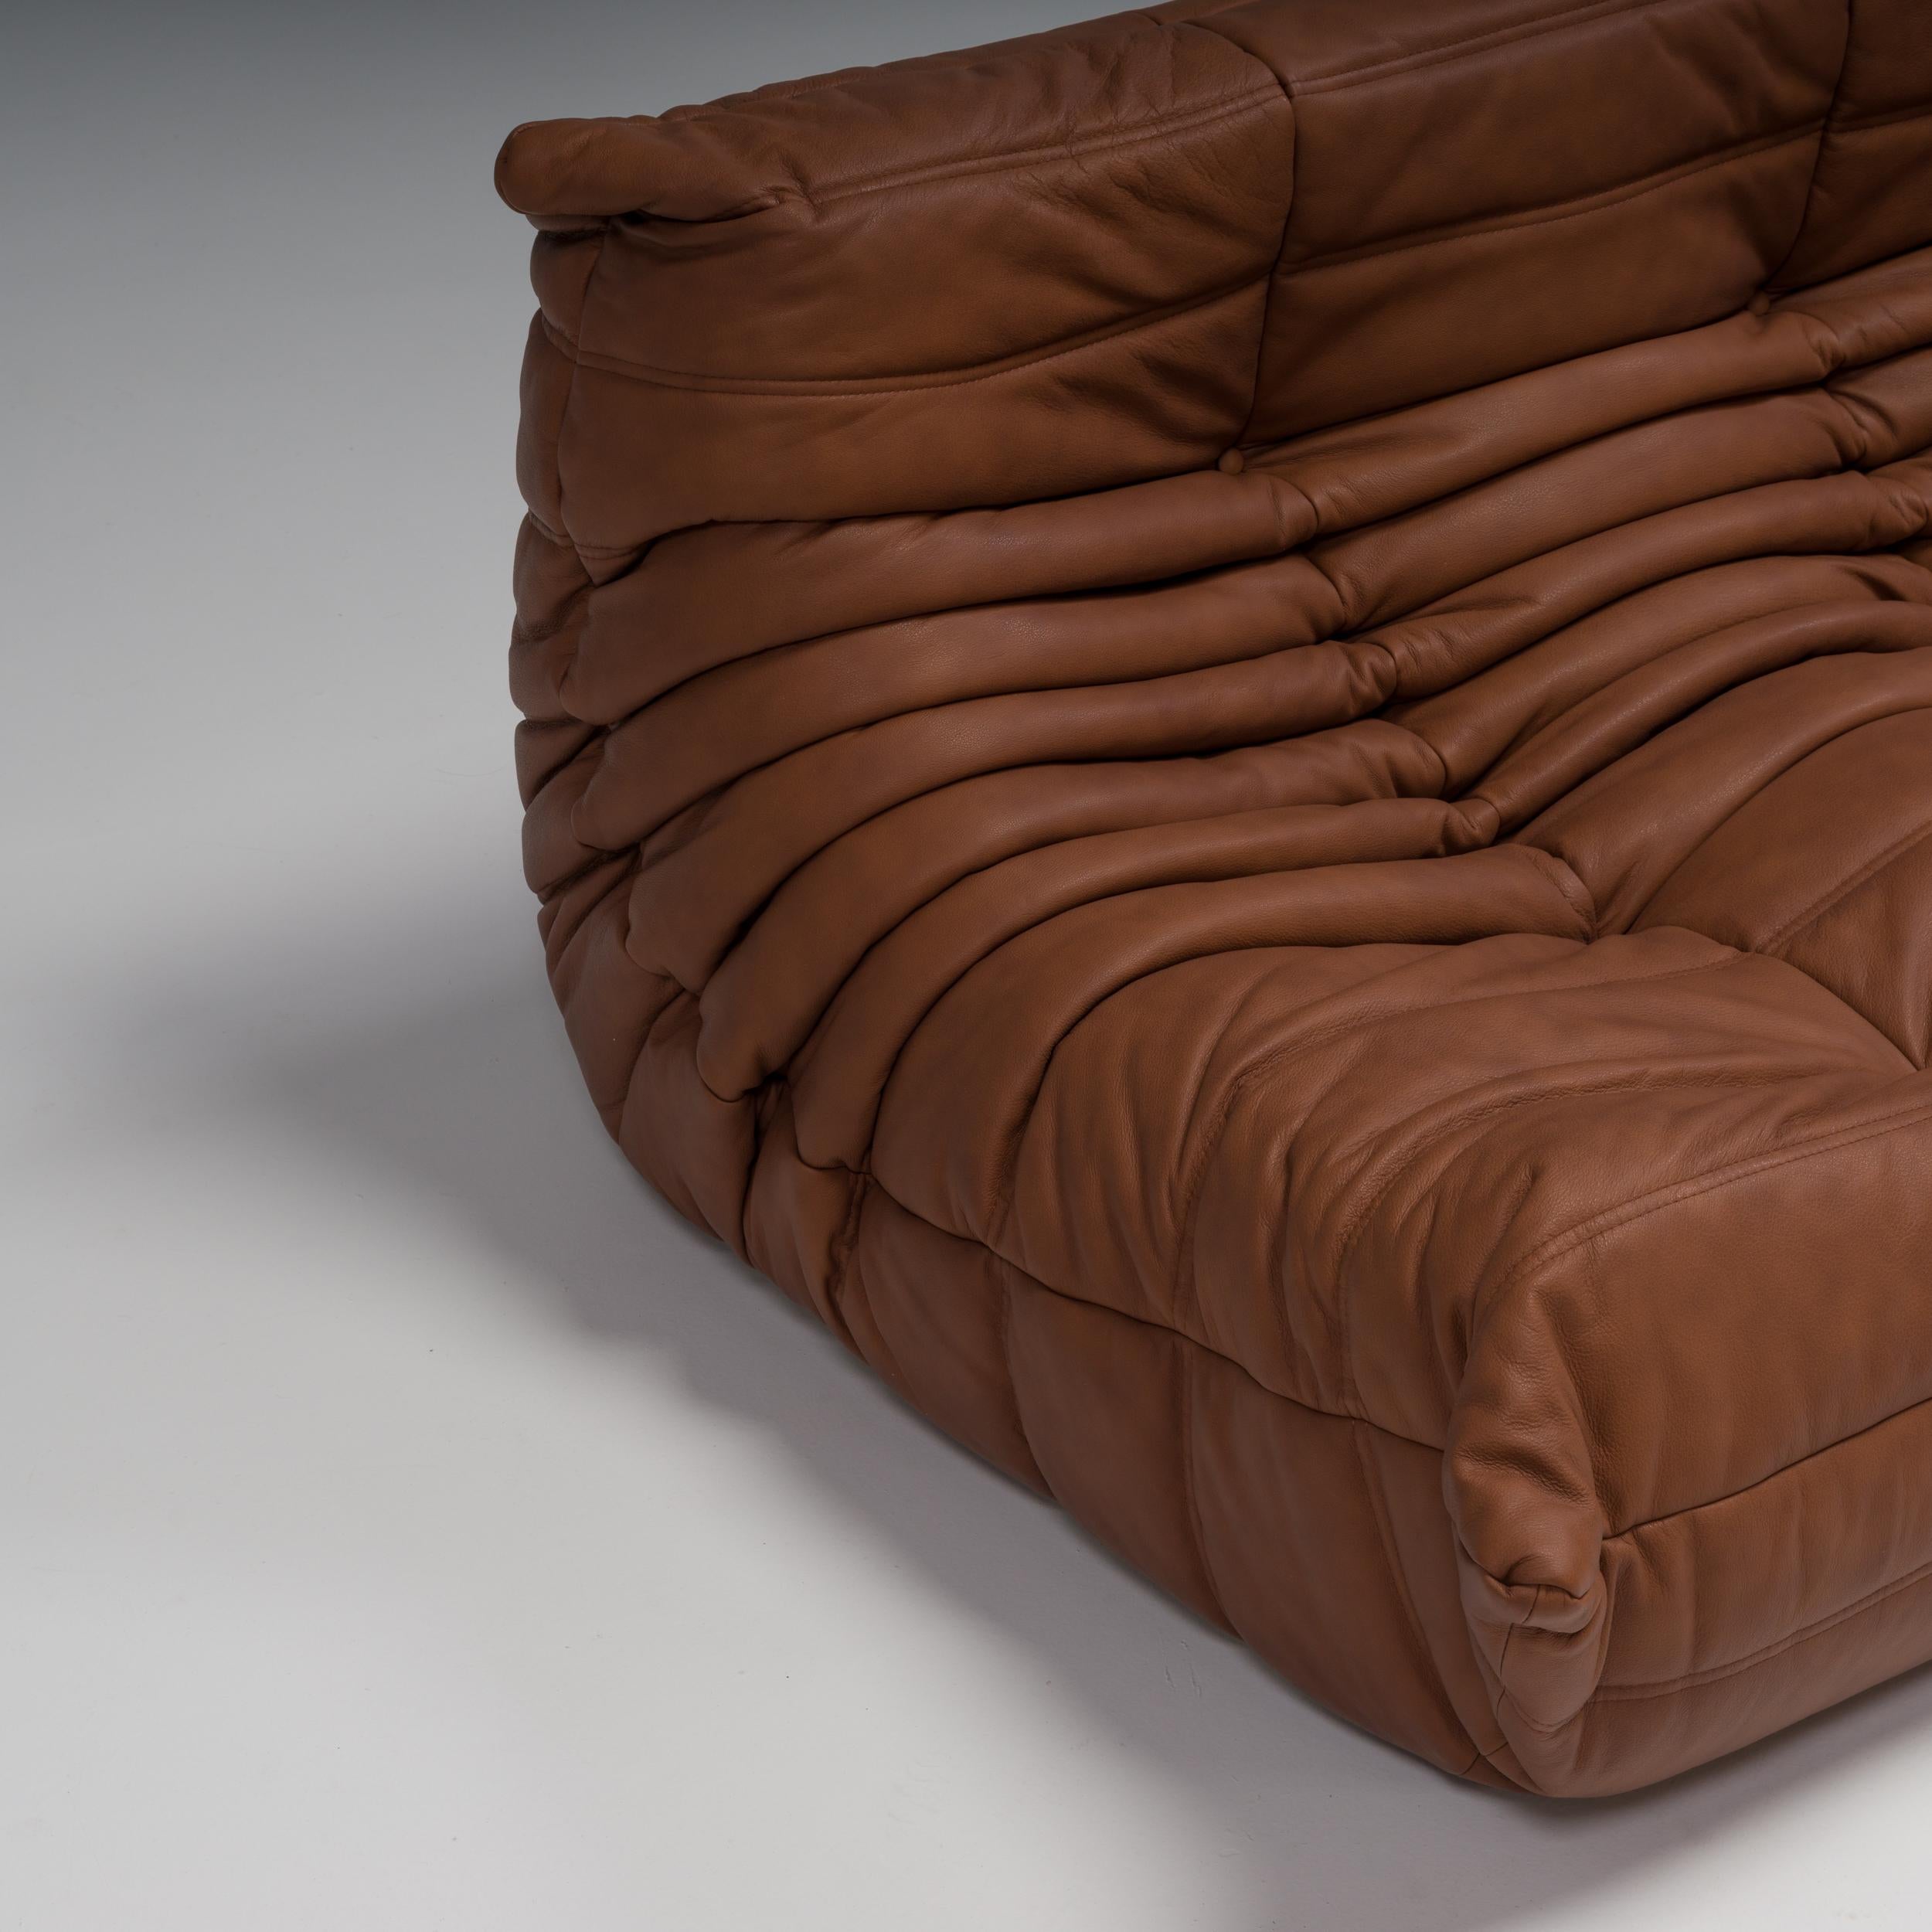 Ligne Roset by Michel Ducaroy Togo Brown Leather Sofa, Set of 4 In Good Condition For Sale In London, GB